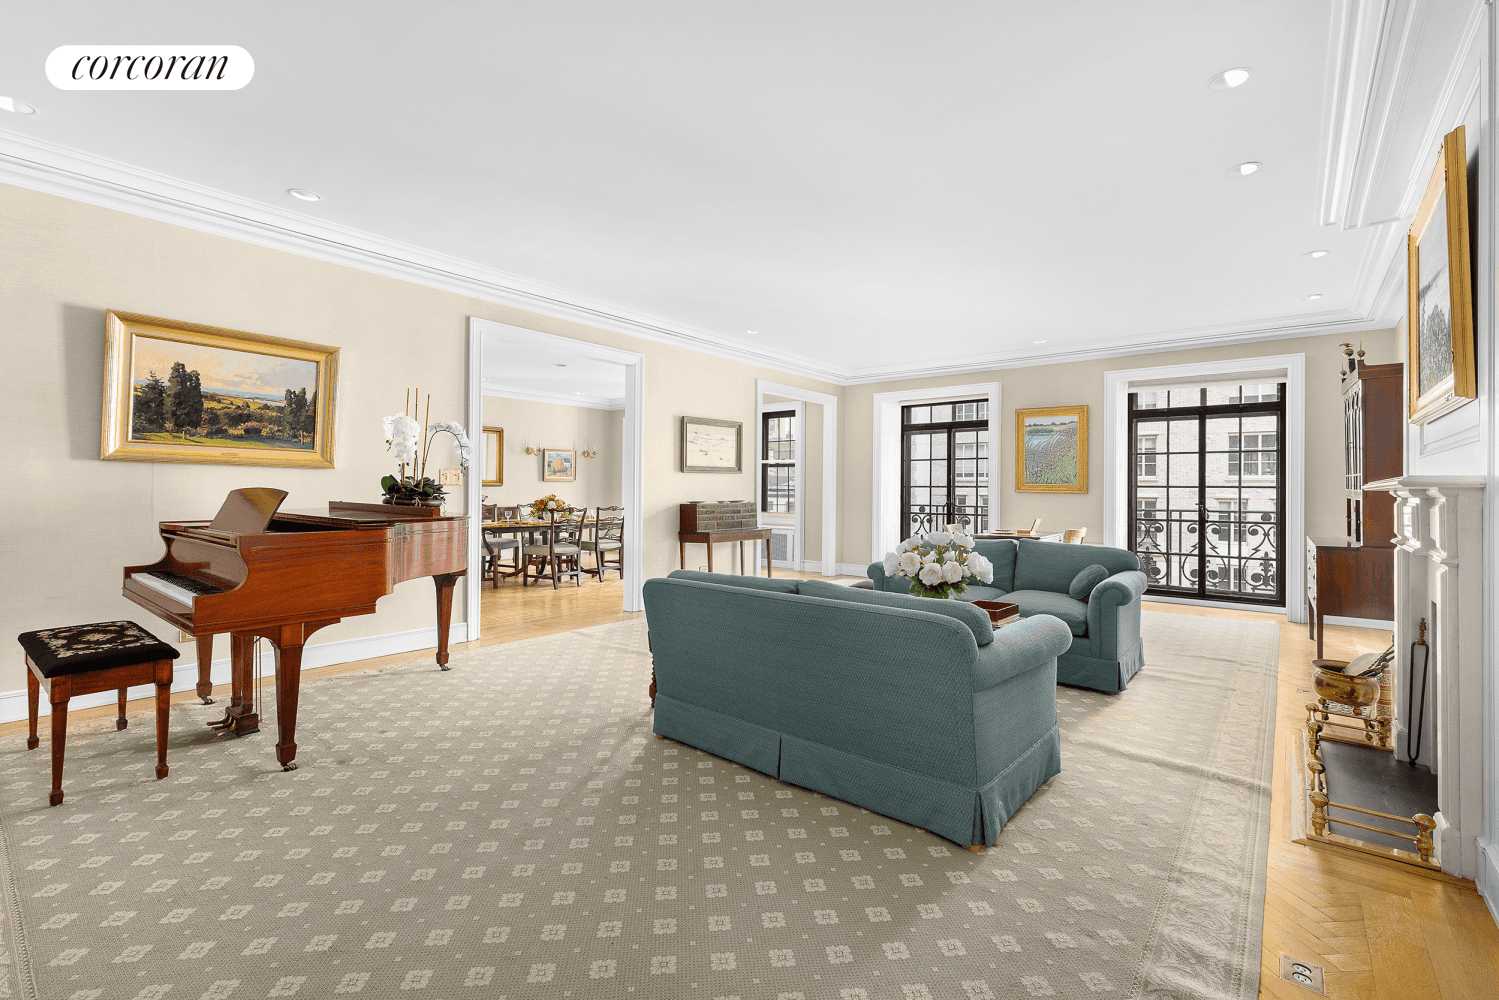 At approximately 6, 226sf, this full floor opportunity is now available and ready for you to create the home of your dreams.